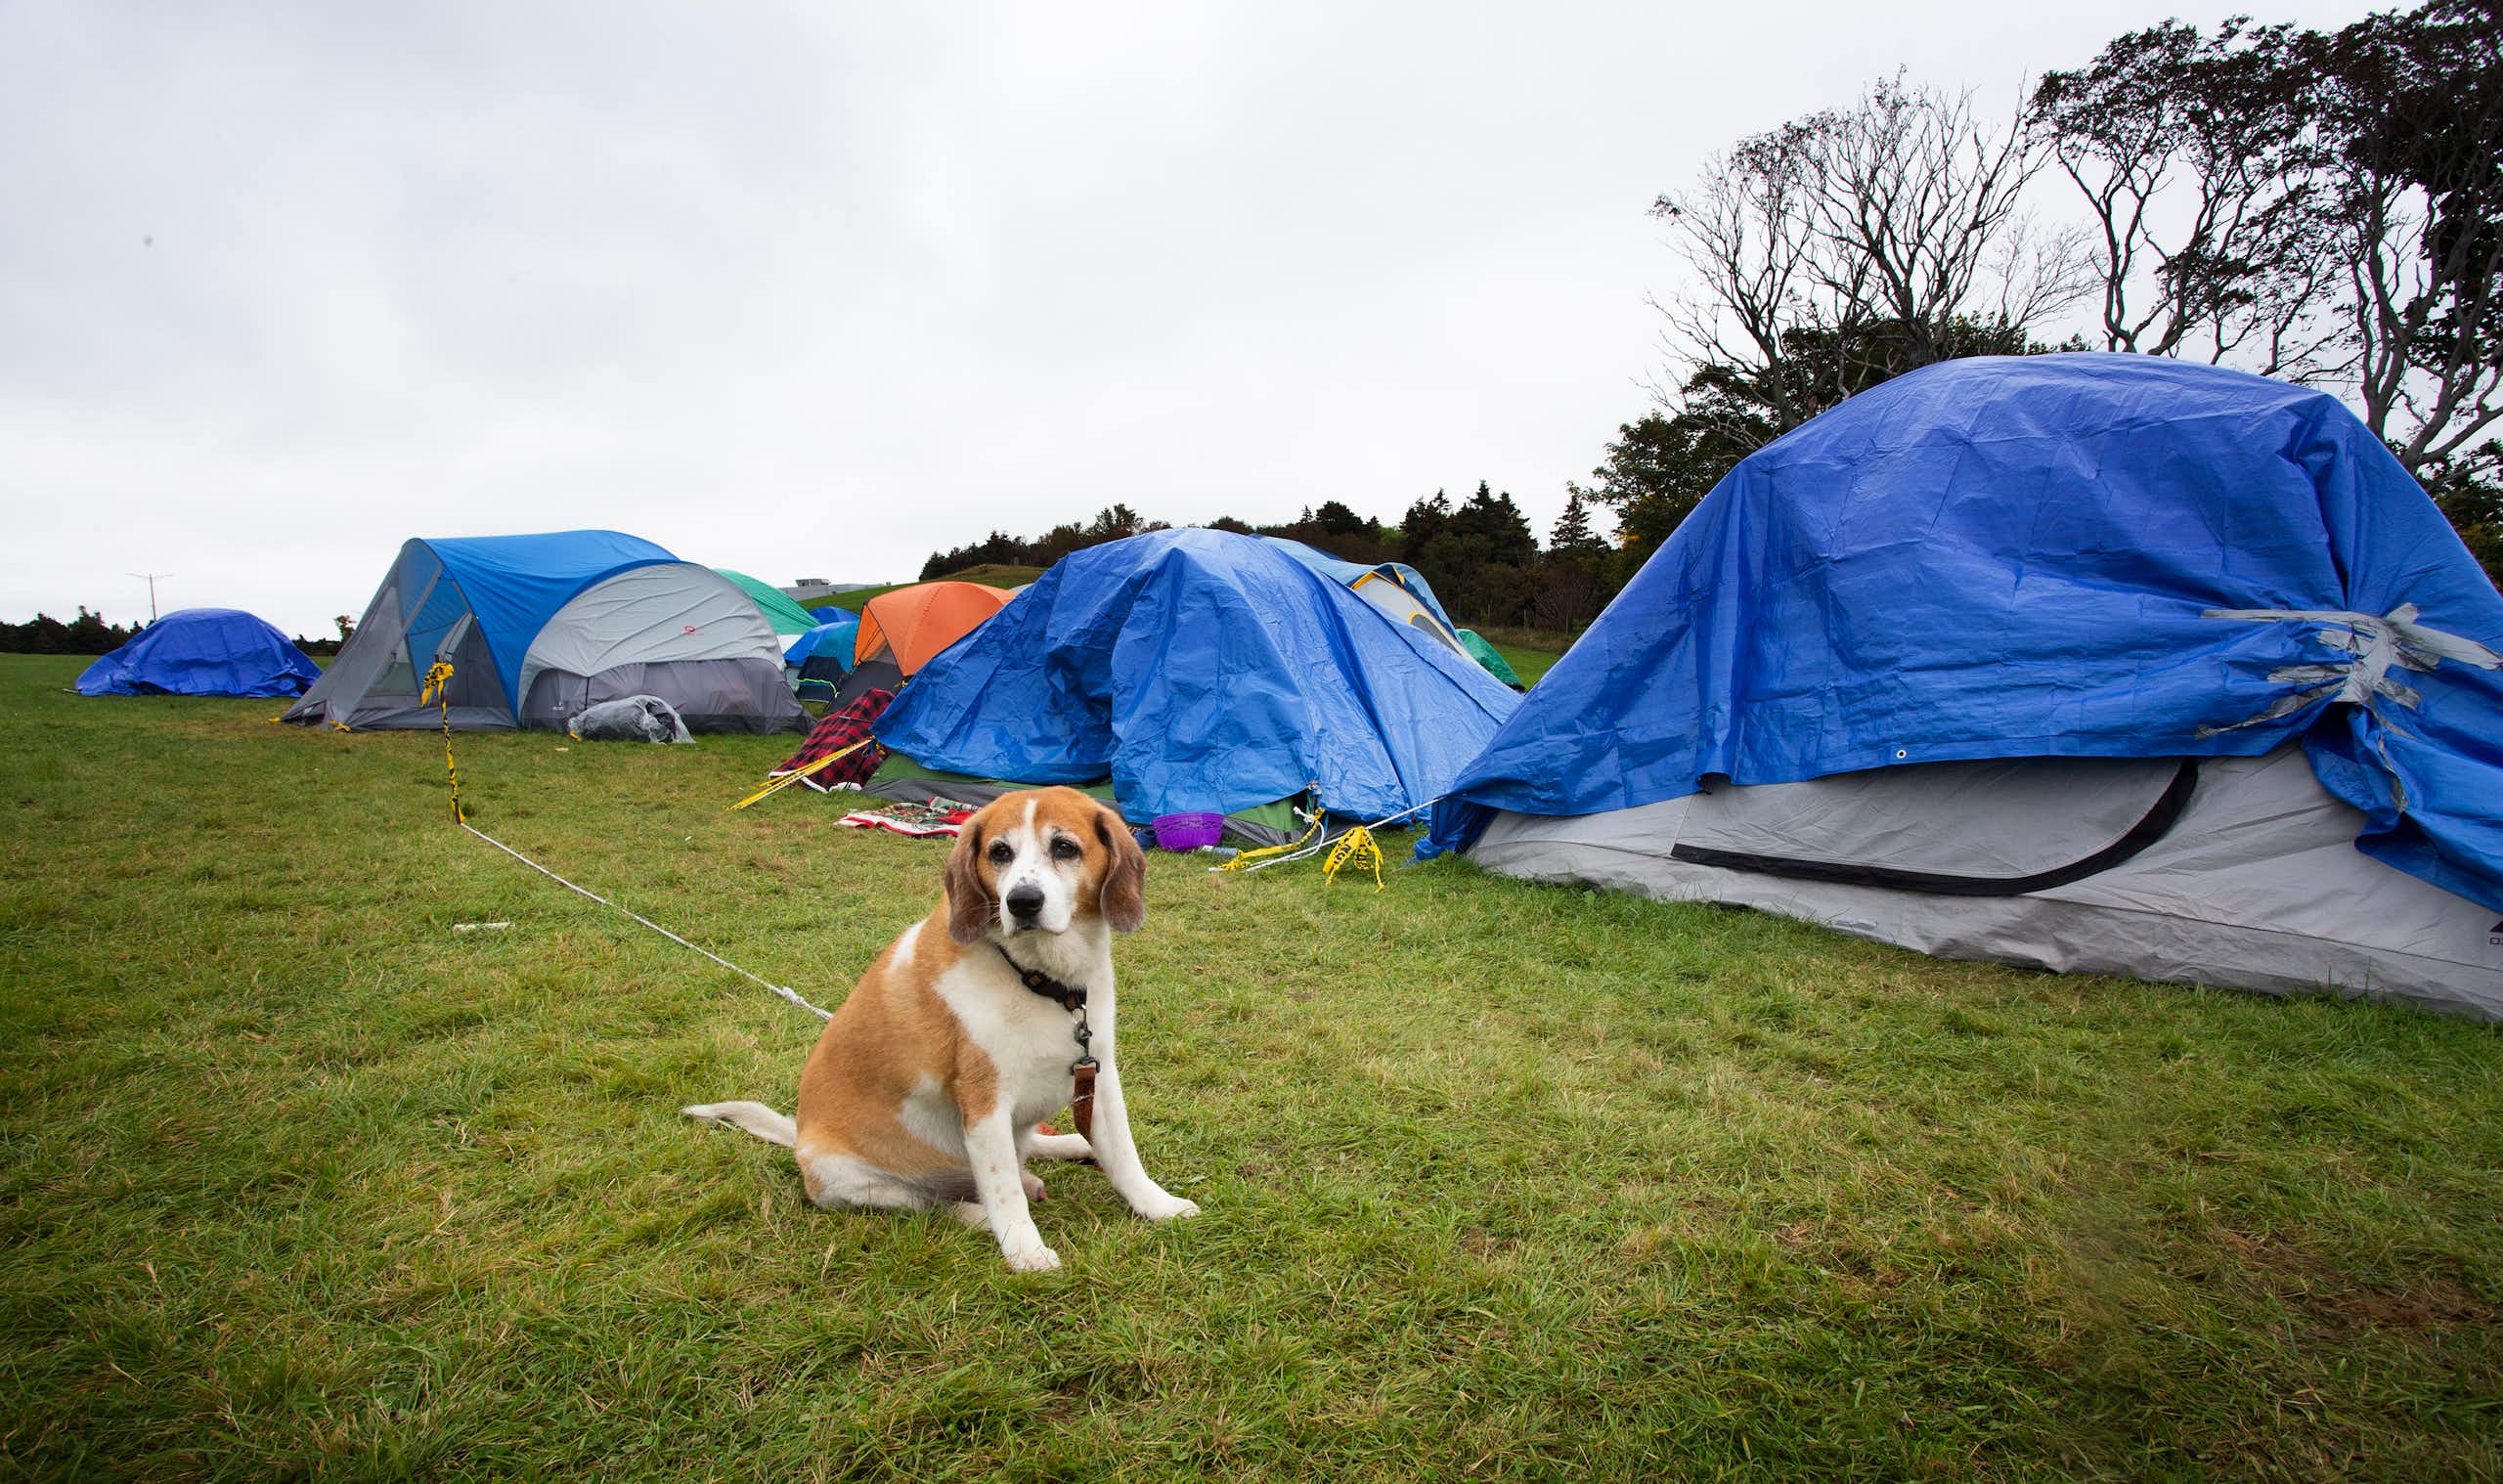 A dog sits in front of a row of tents on a grassy area.